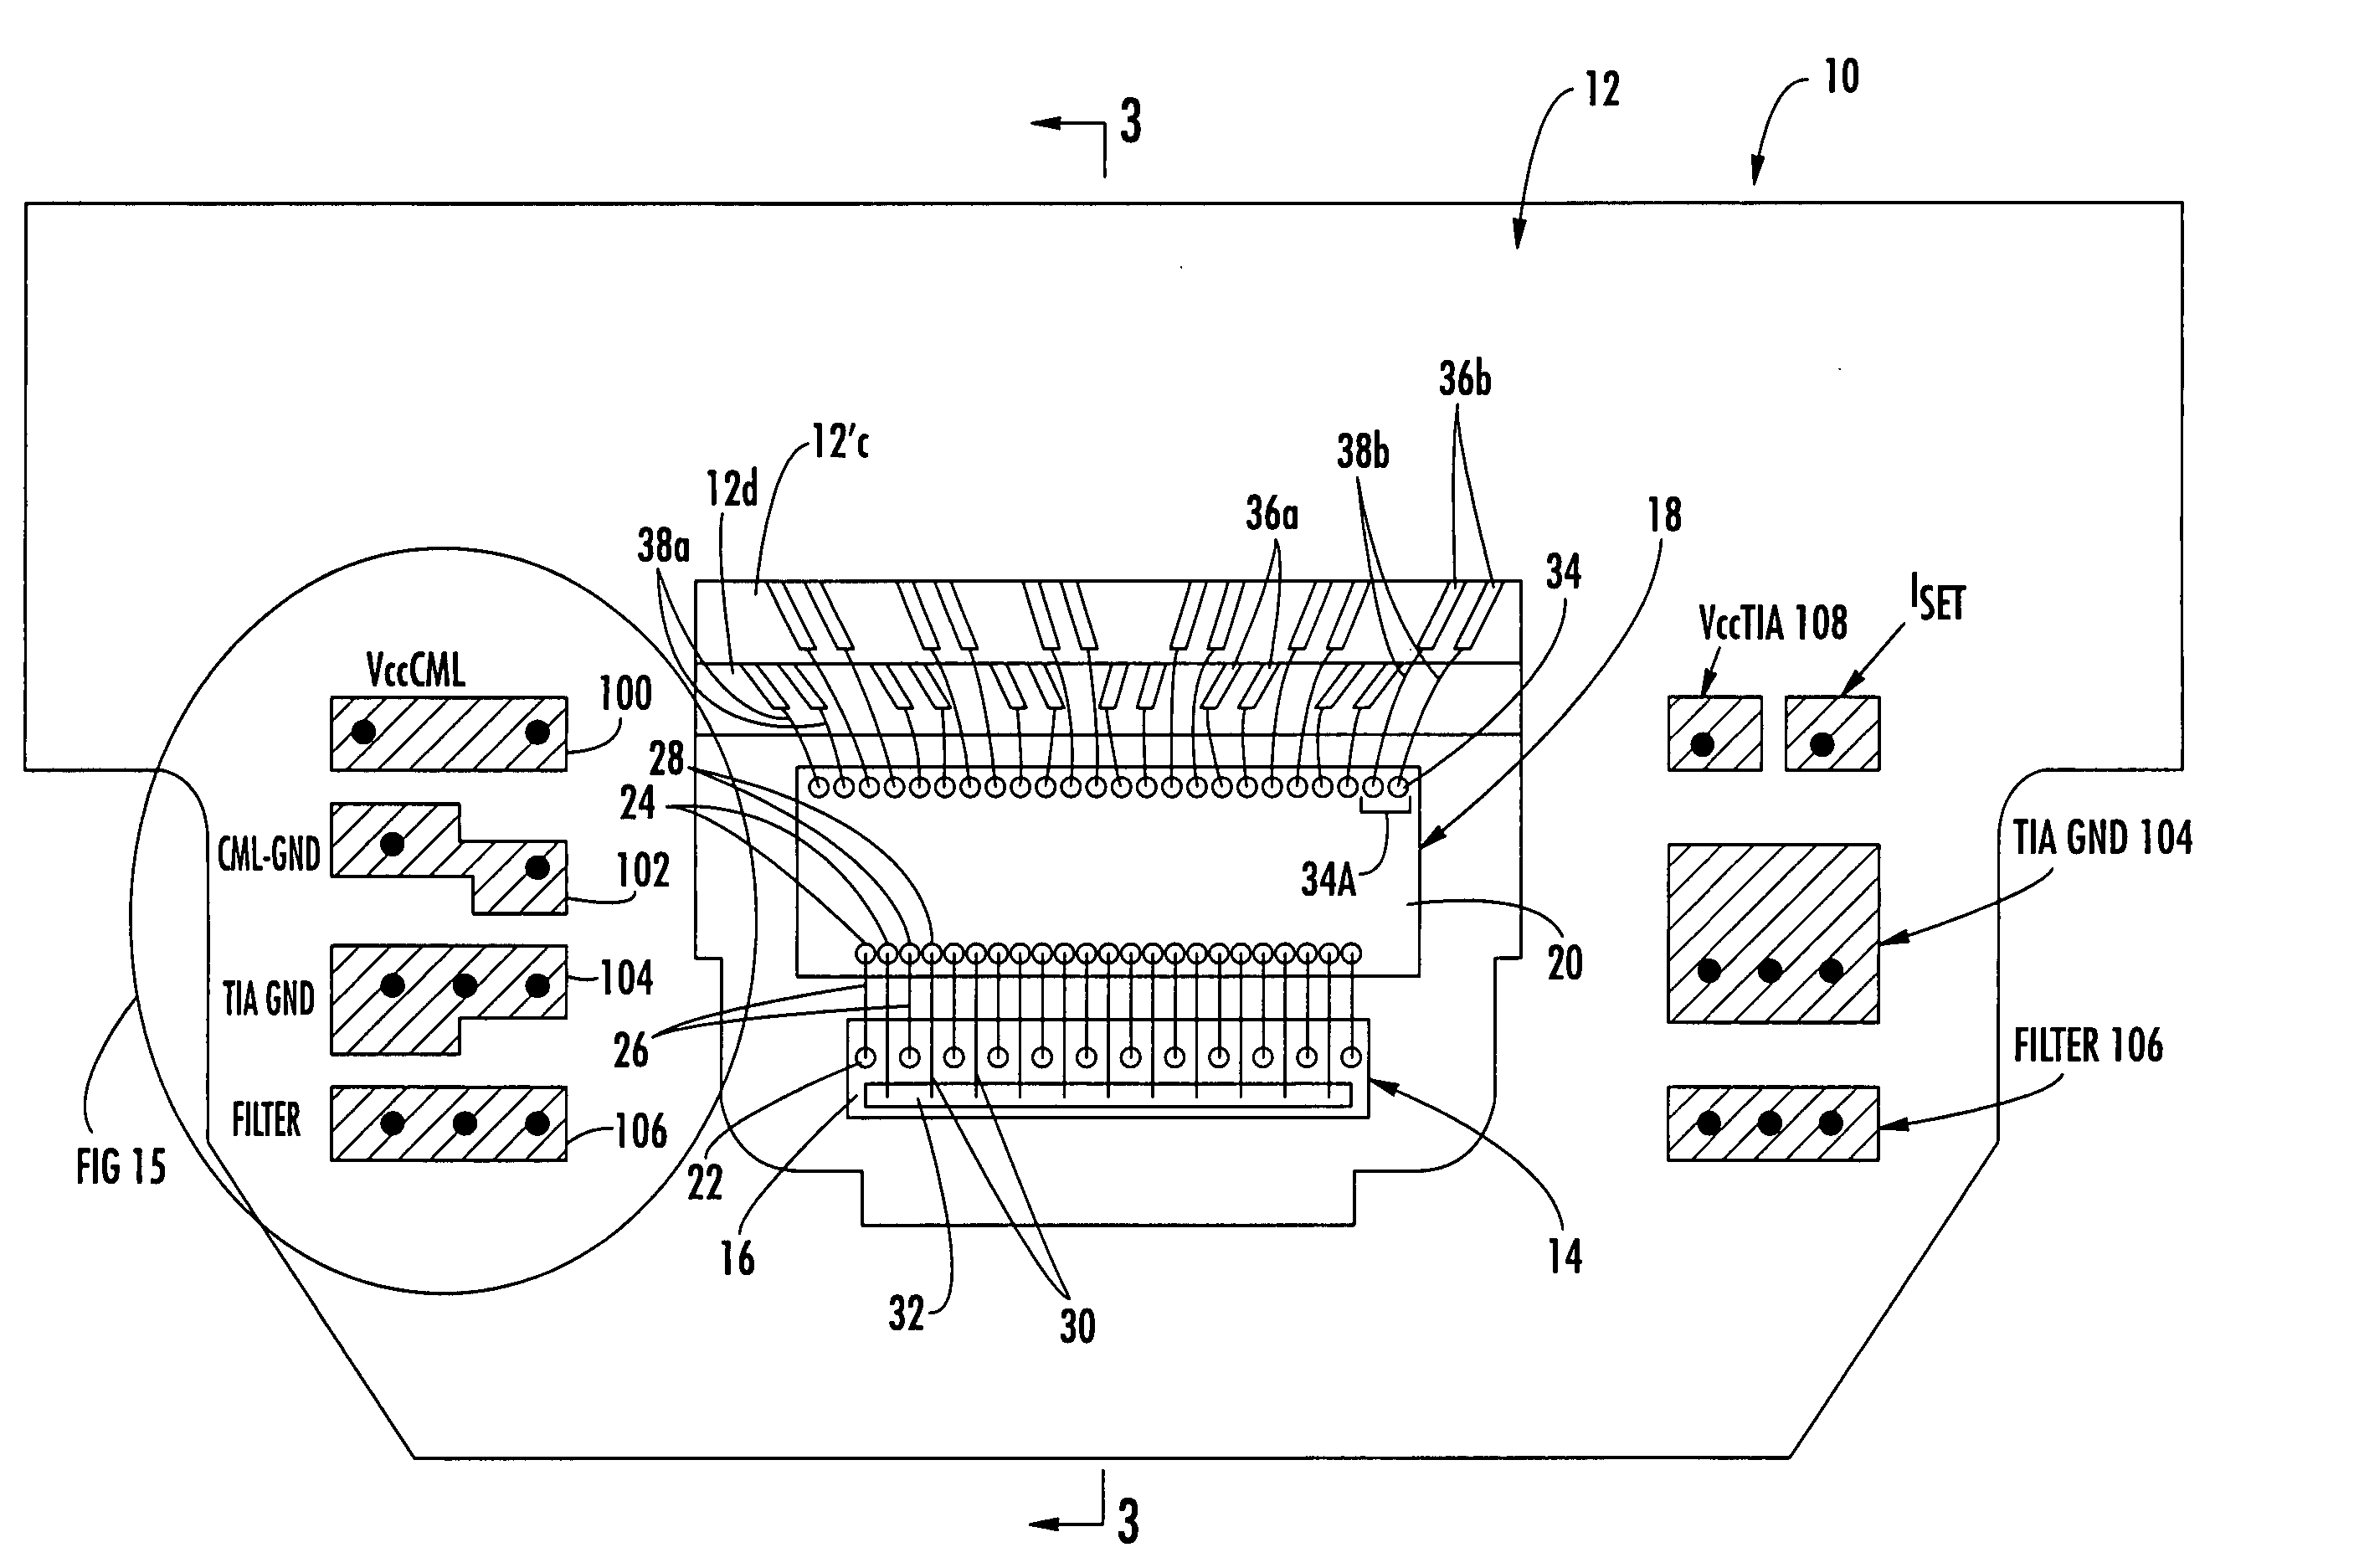 Arrayed receiver optical sub-assembly including layered ceramic substrate for alleviation of cross-talk and noise between channels